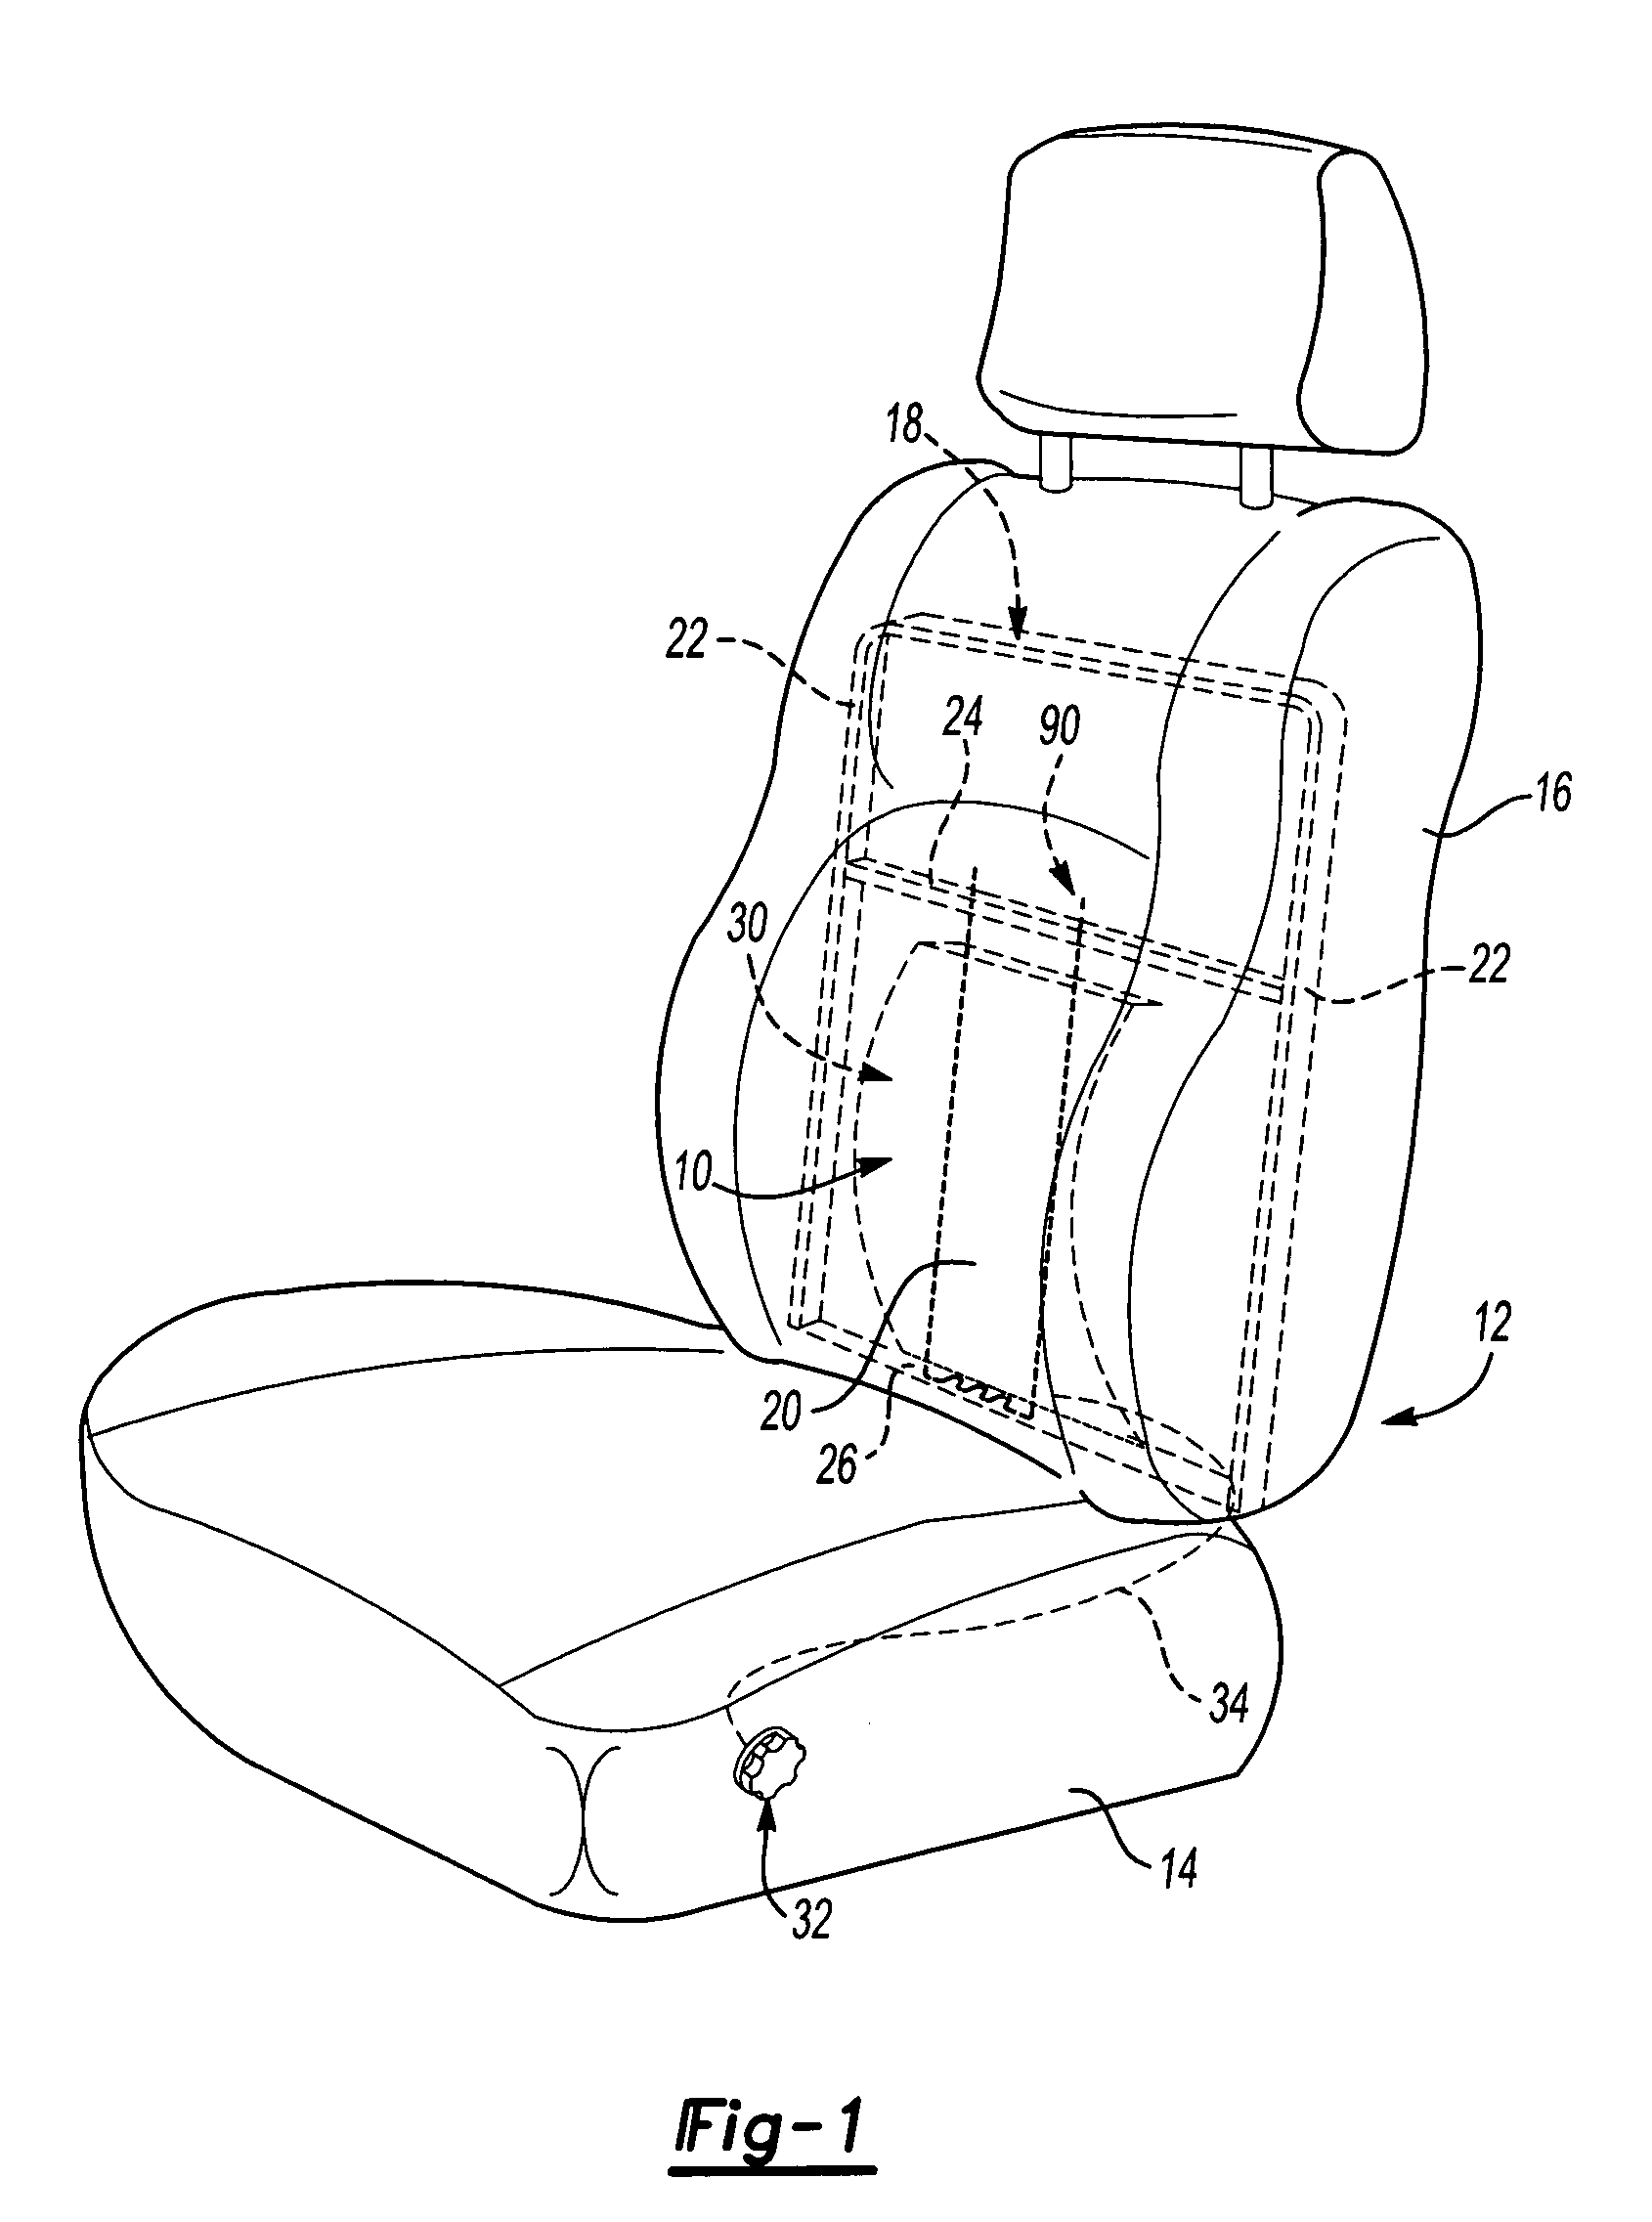 Adjustable lumbar support for vehicle seat